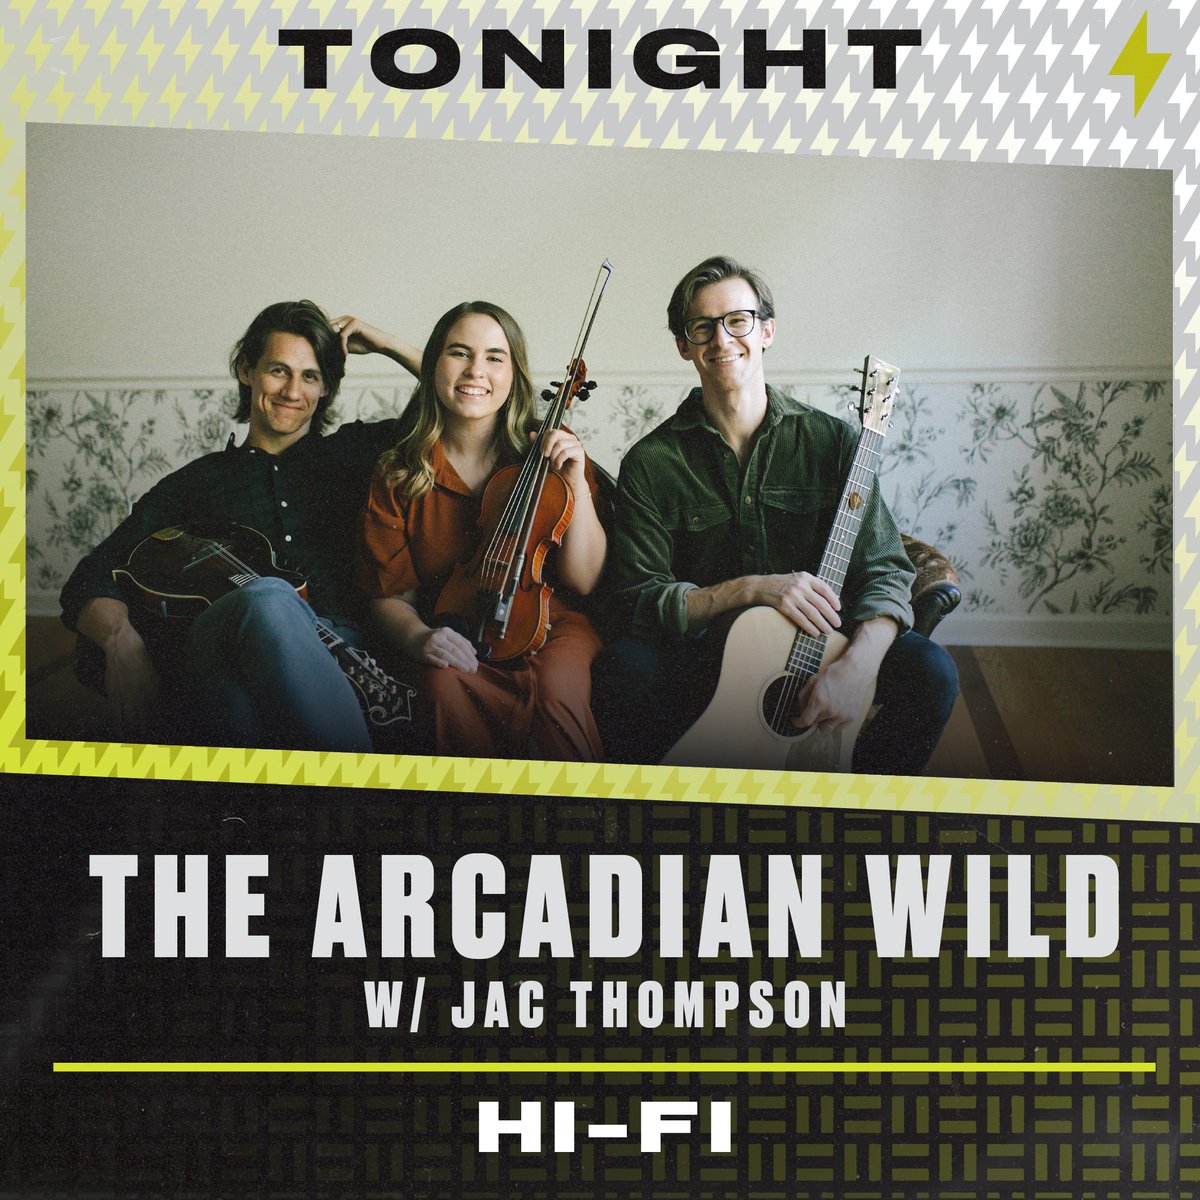 Tonight in HI-FI ⚡️ @TheArcadianWild w/ special guest @jac__thompson Doors: 7PM | Music: 8PM 🎶 Tickets available at the box office + fanlink.to/arcadianwild23 🎫